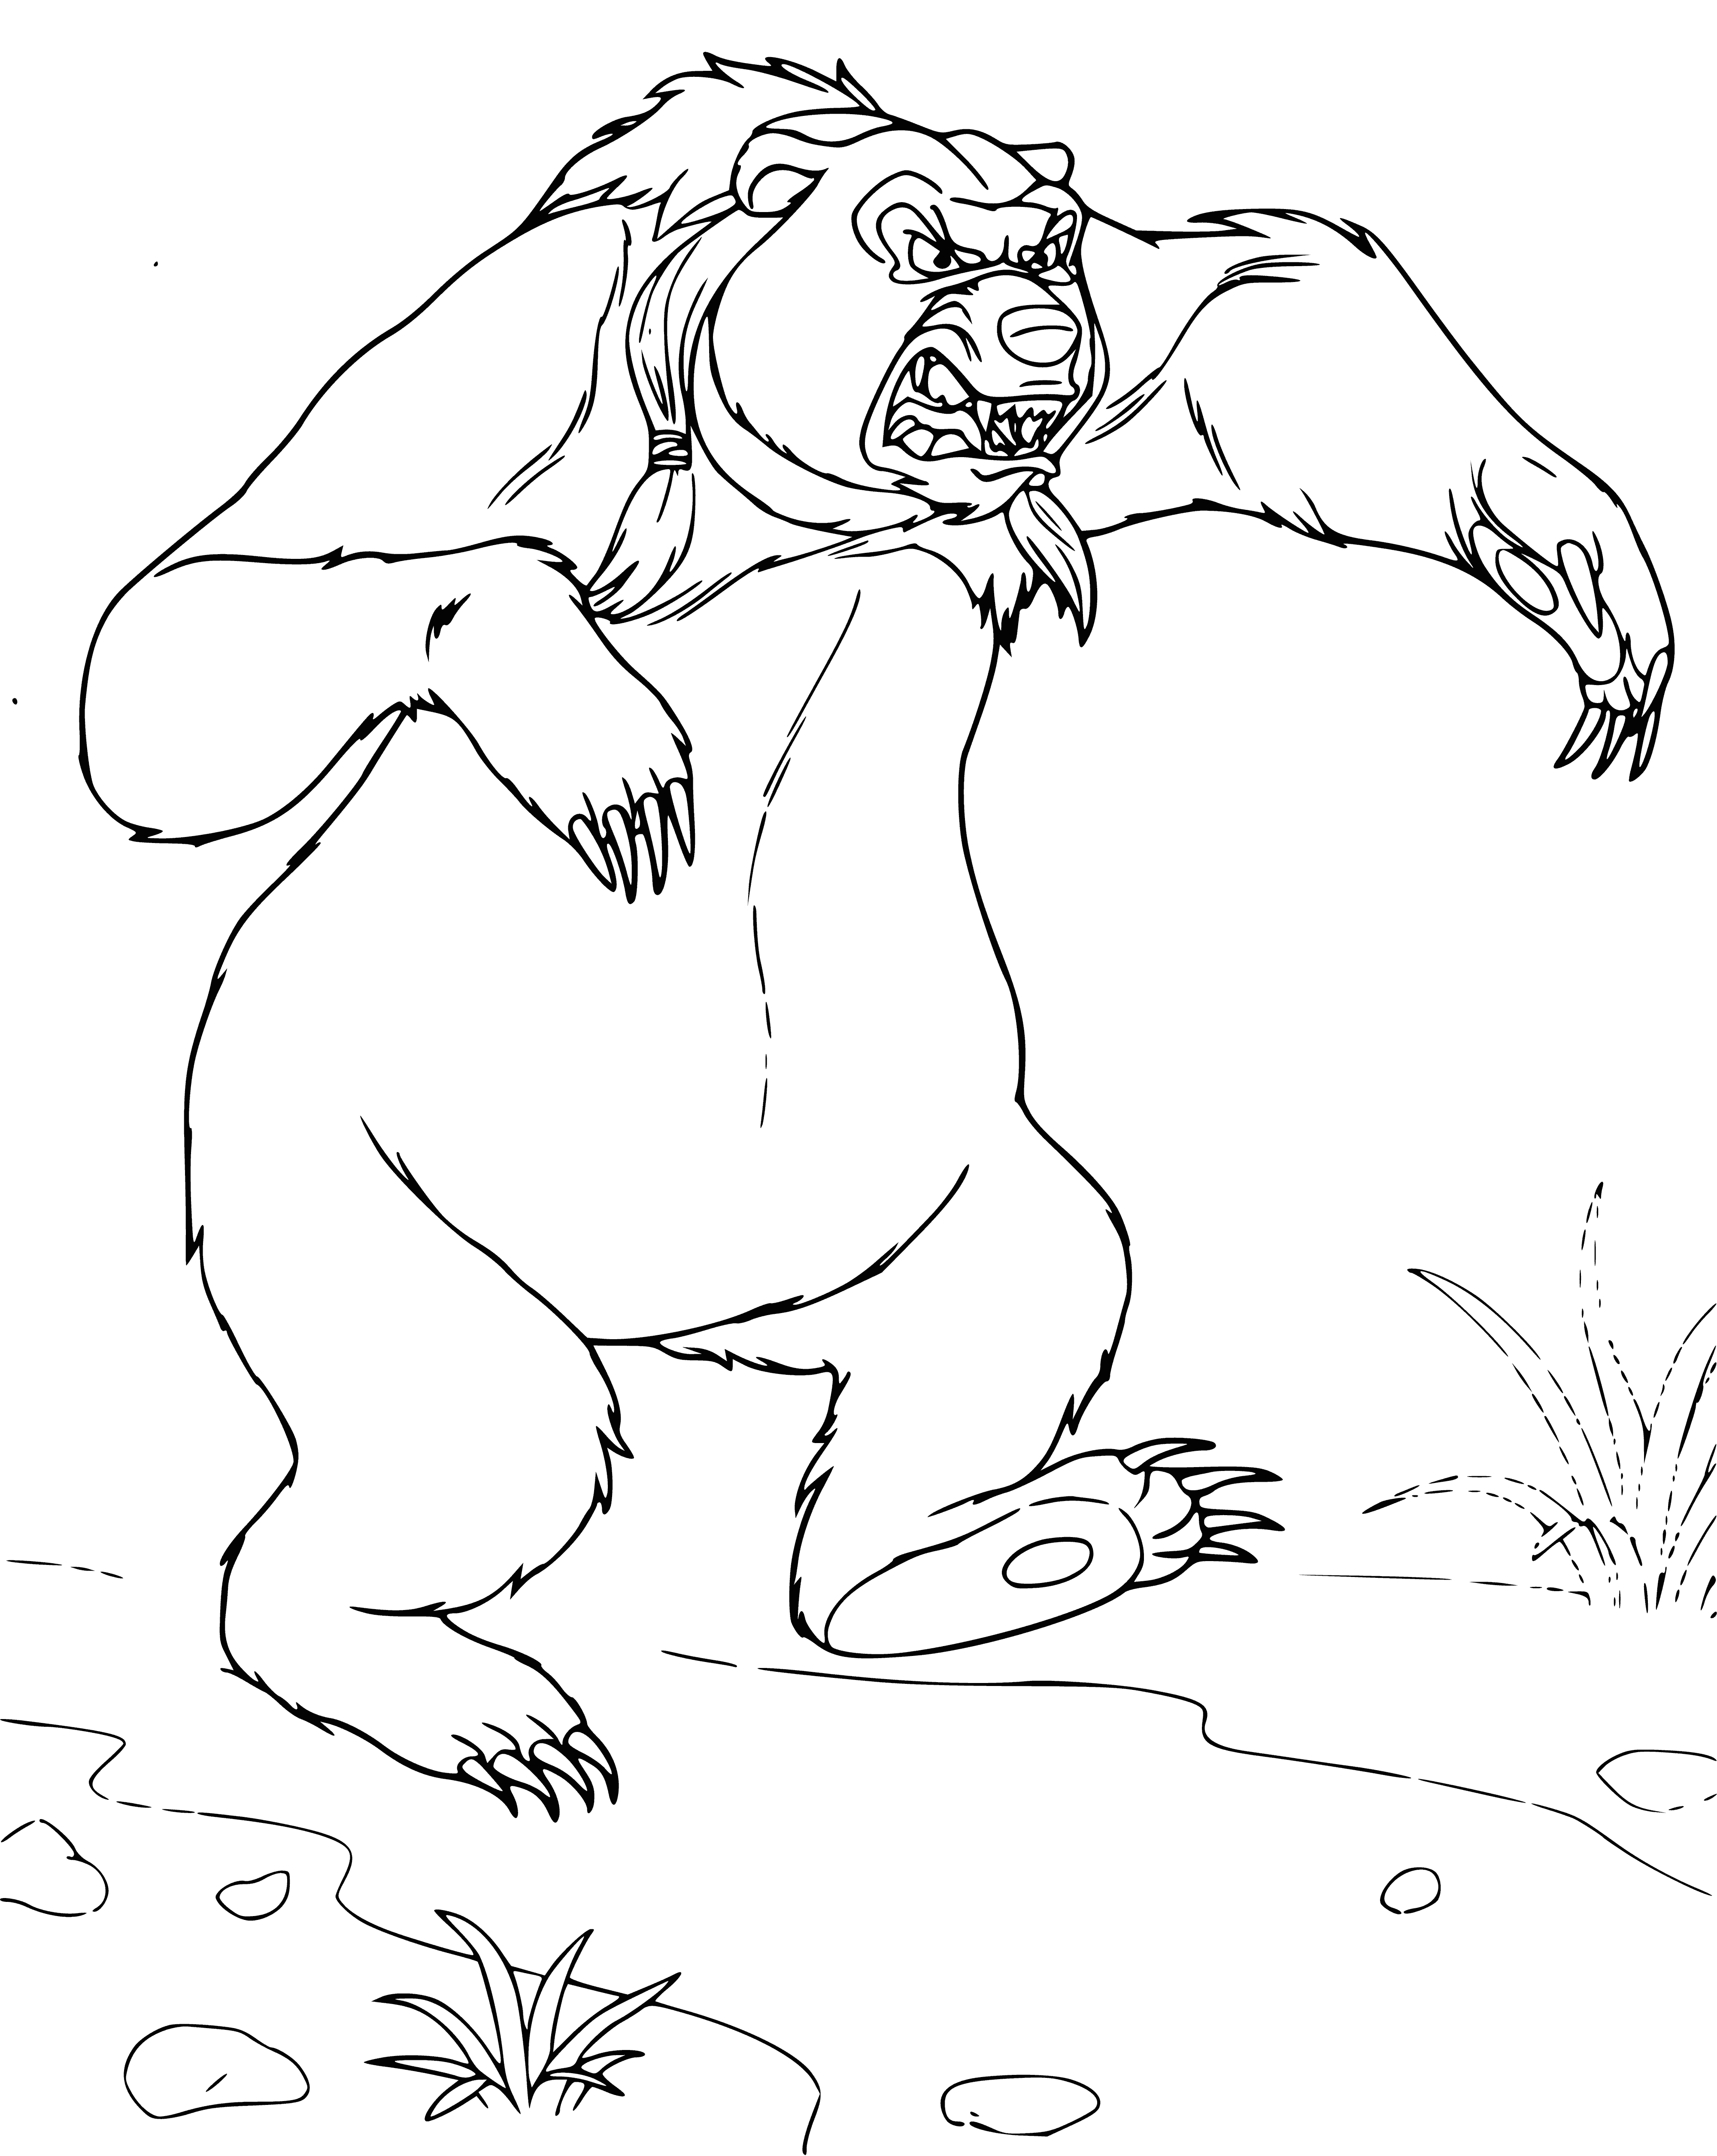 coloring page: A fearsome werewolf, Prince Vladimir - Krivzha: Sharp teeth, bright red eyes, wild hair, fur-covered body, powerful limbs. Capable of tearing prey apart with bare hands.